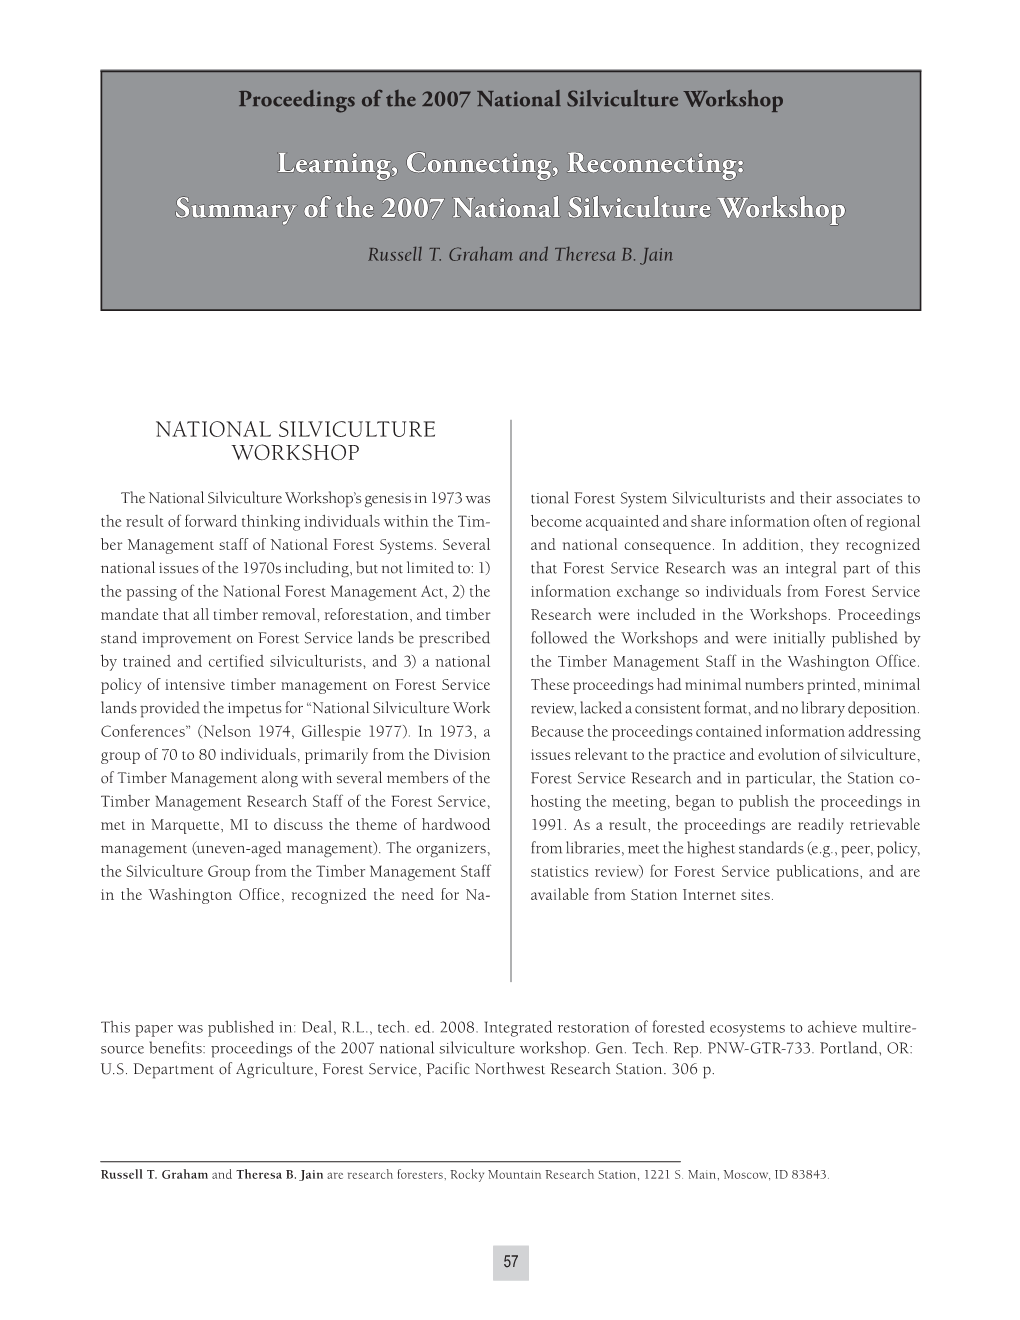 Summary of the 2007 National Silviculture Workshop Russell T